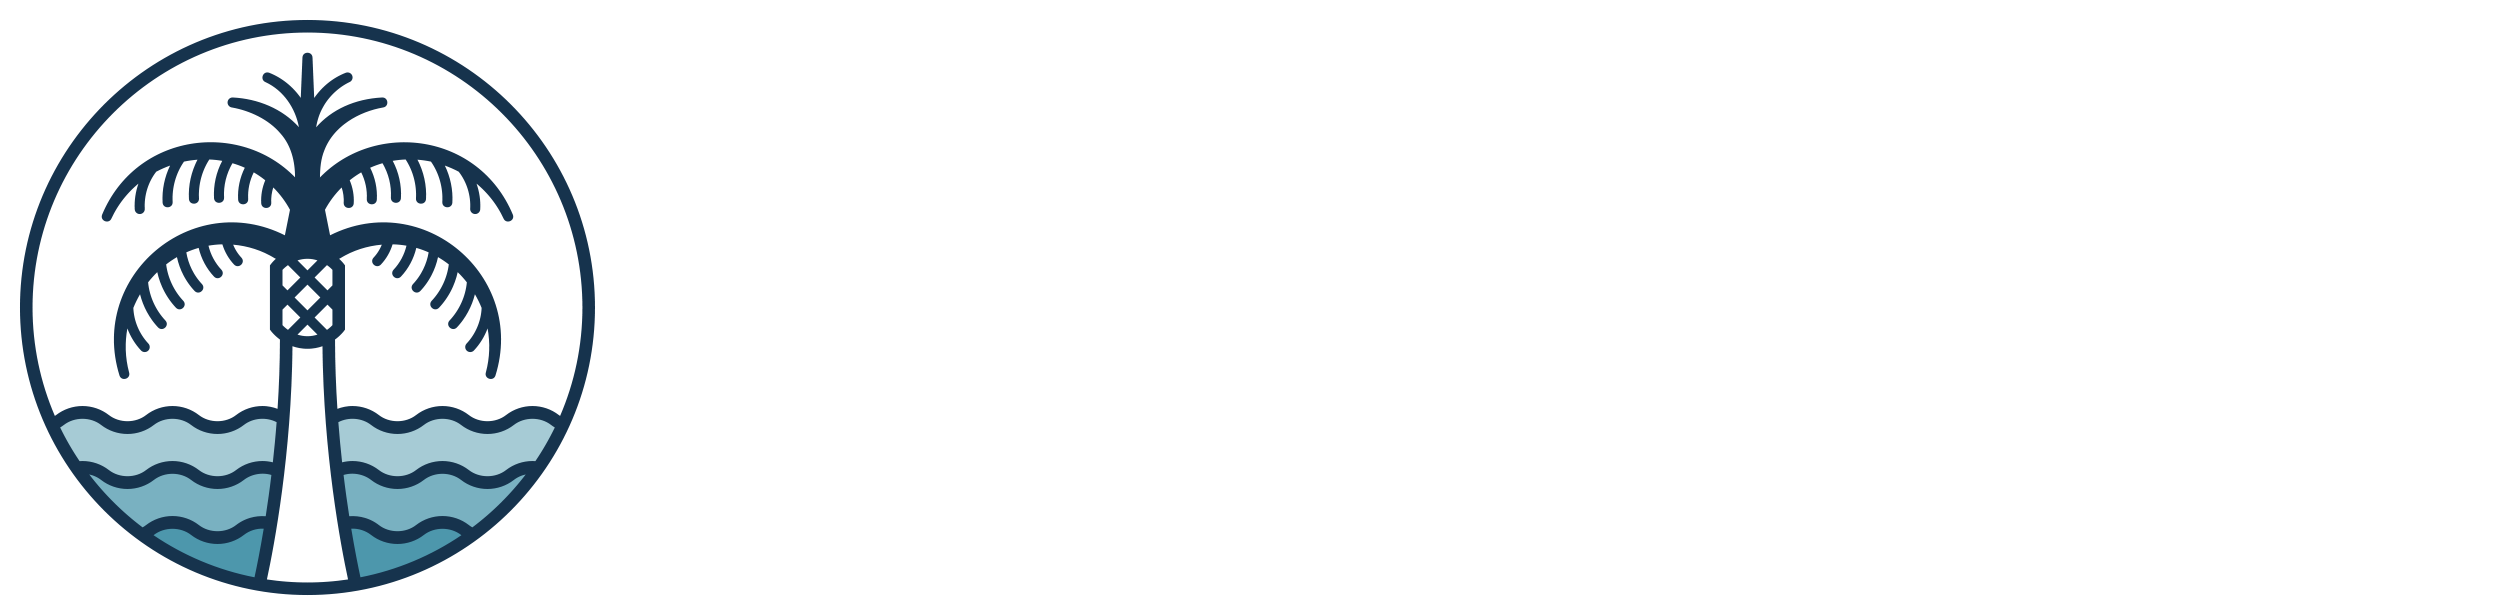 Bluewater vacation homes